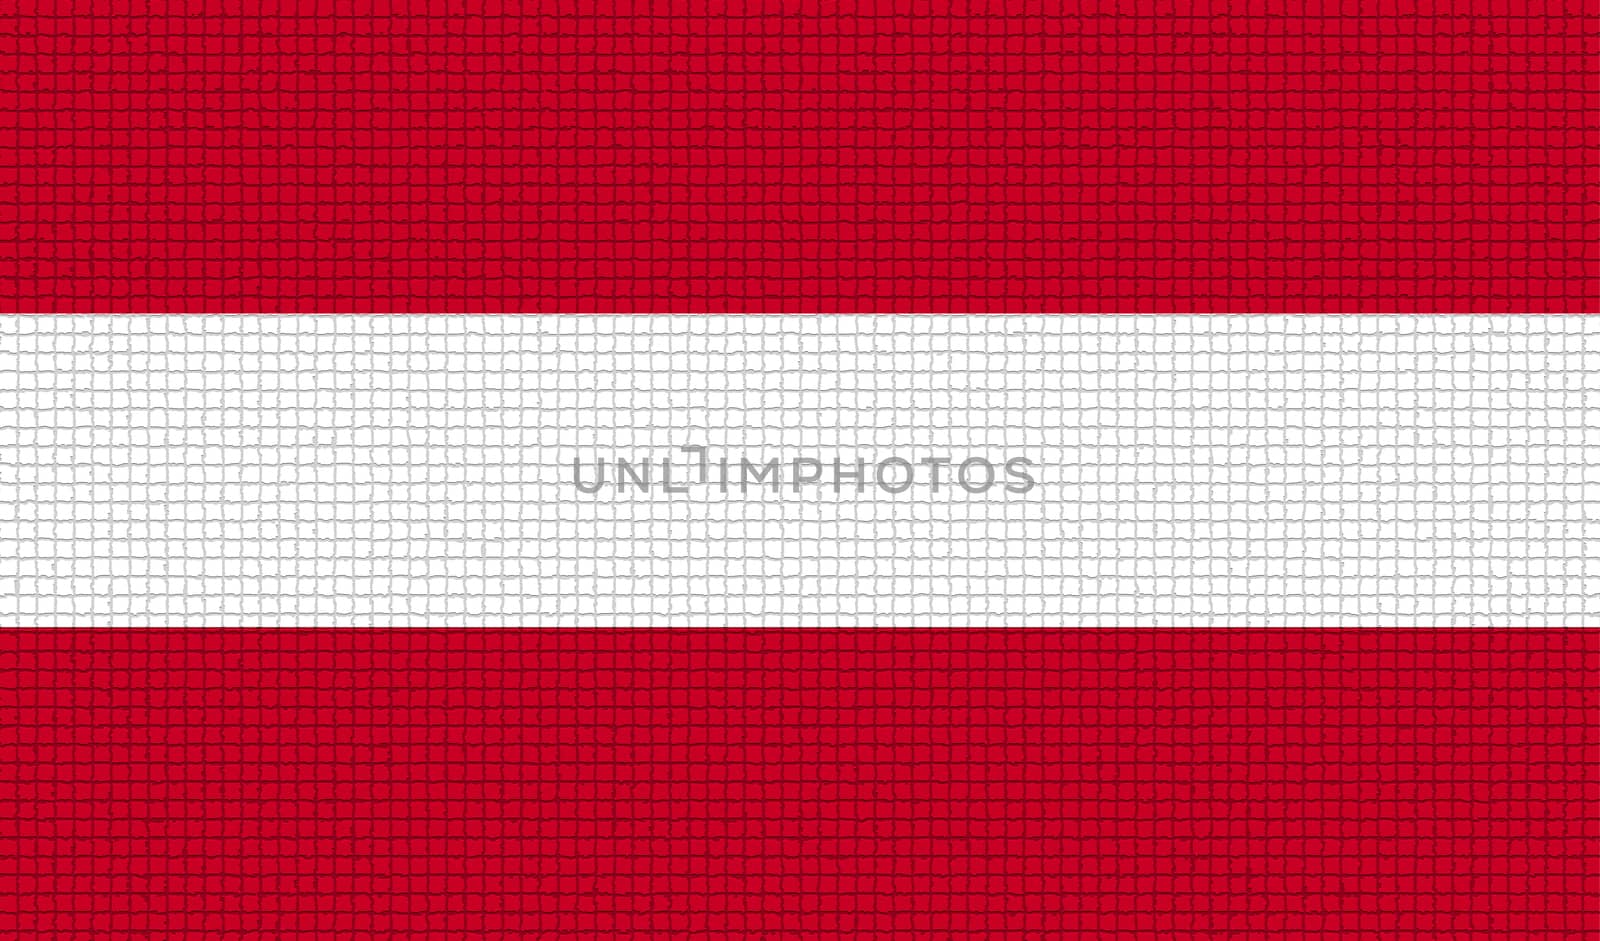 Flags of Austria with abstract textures. Rasterized version